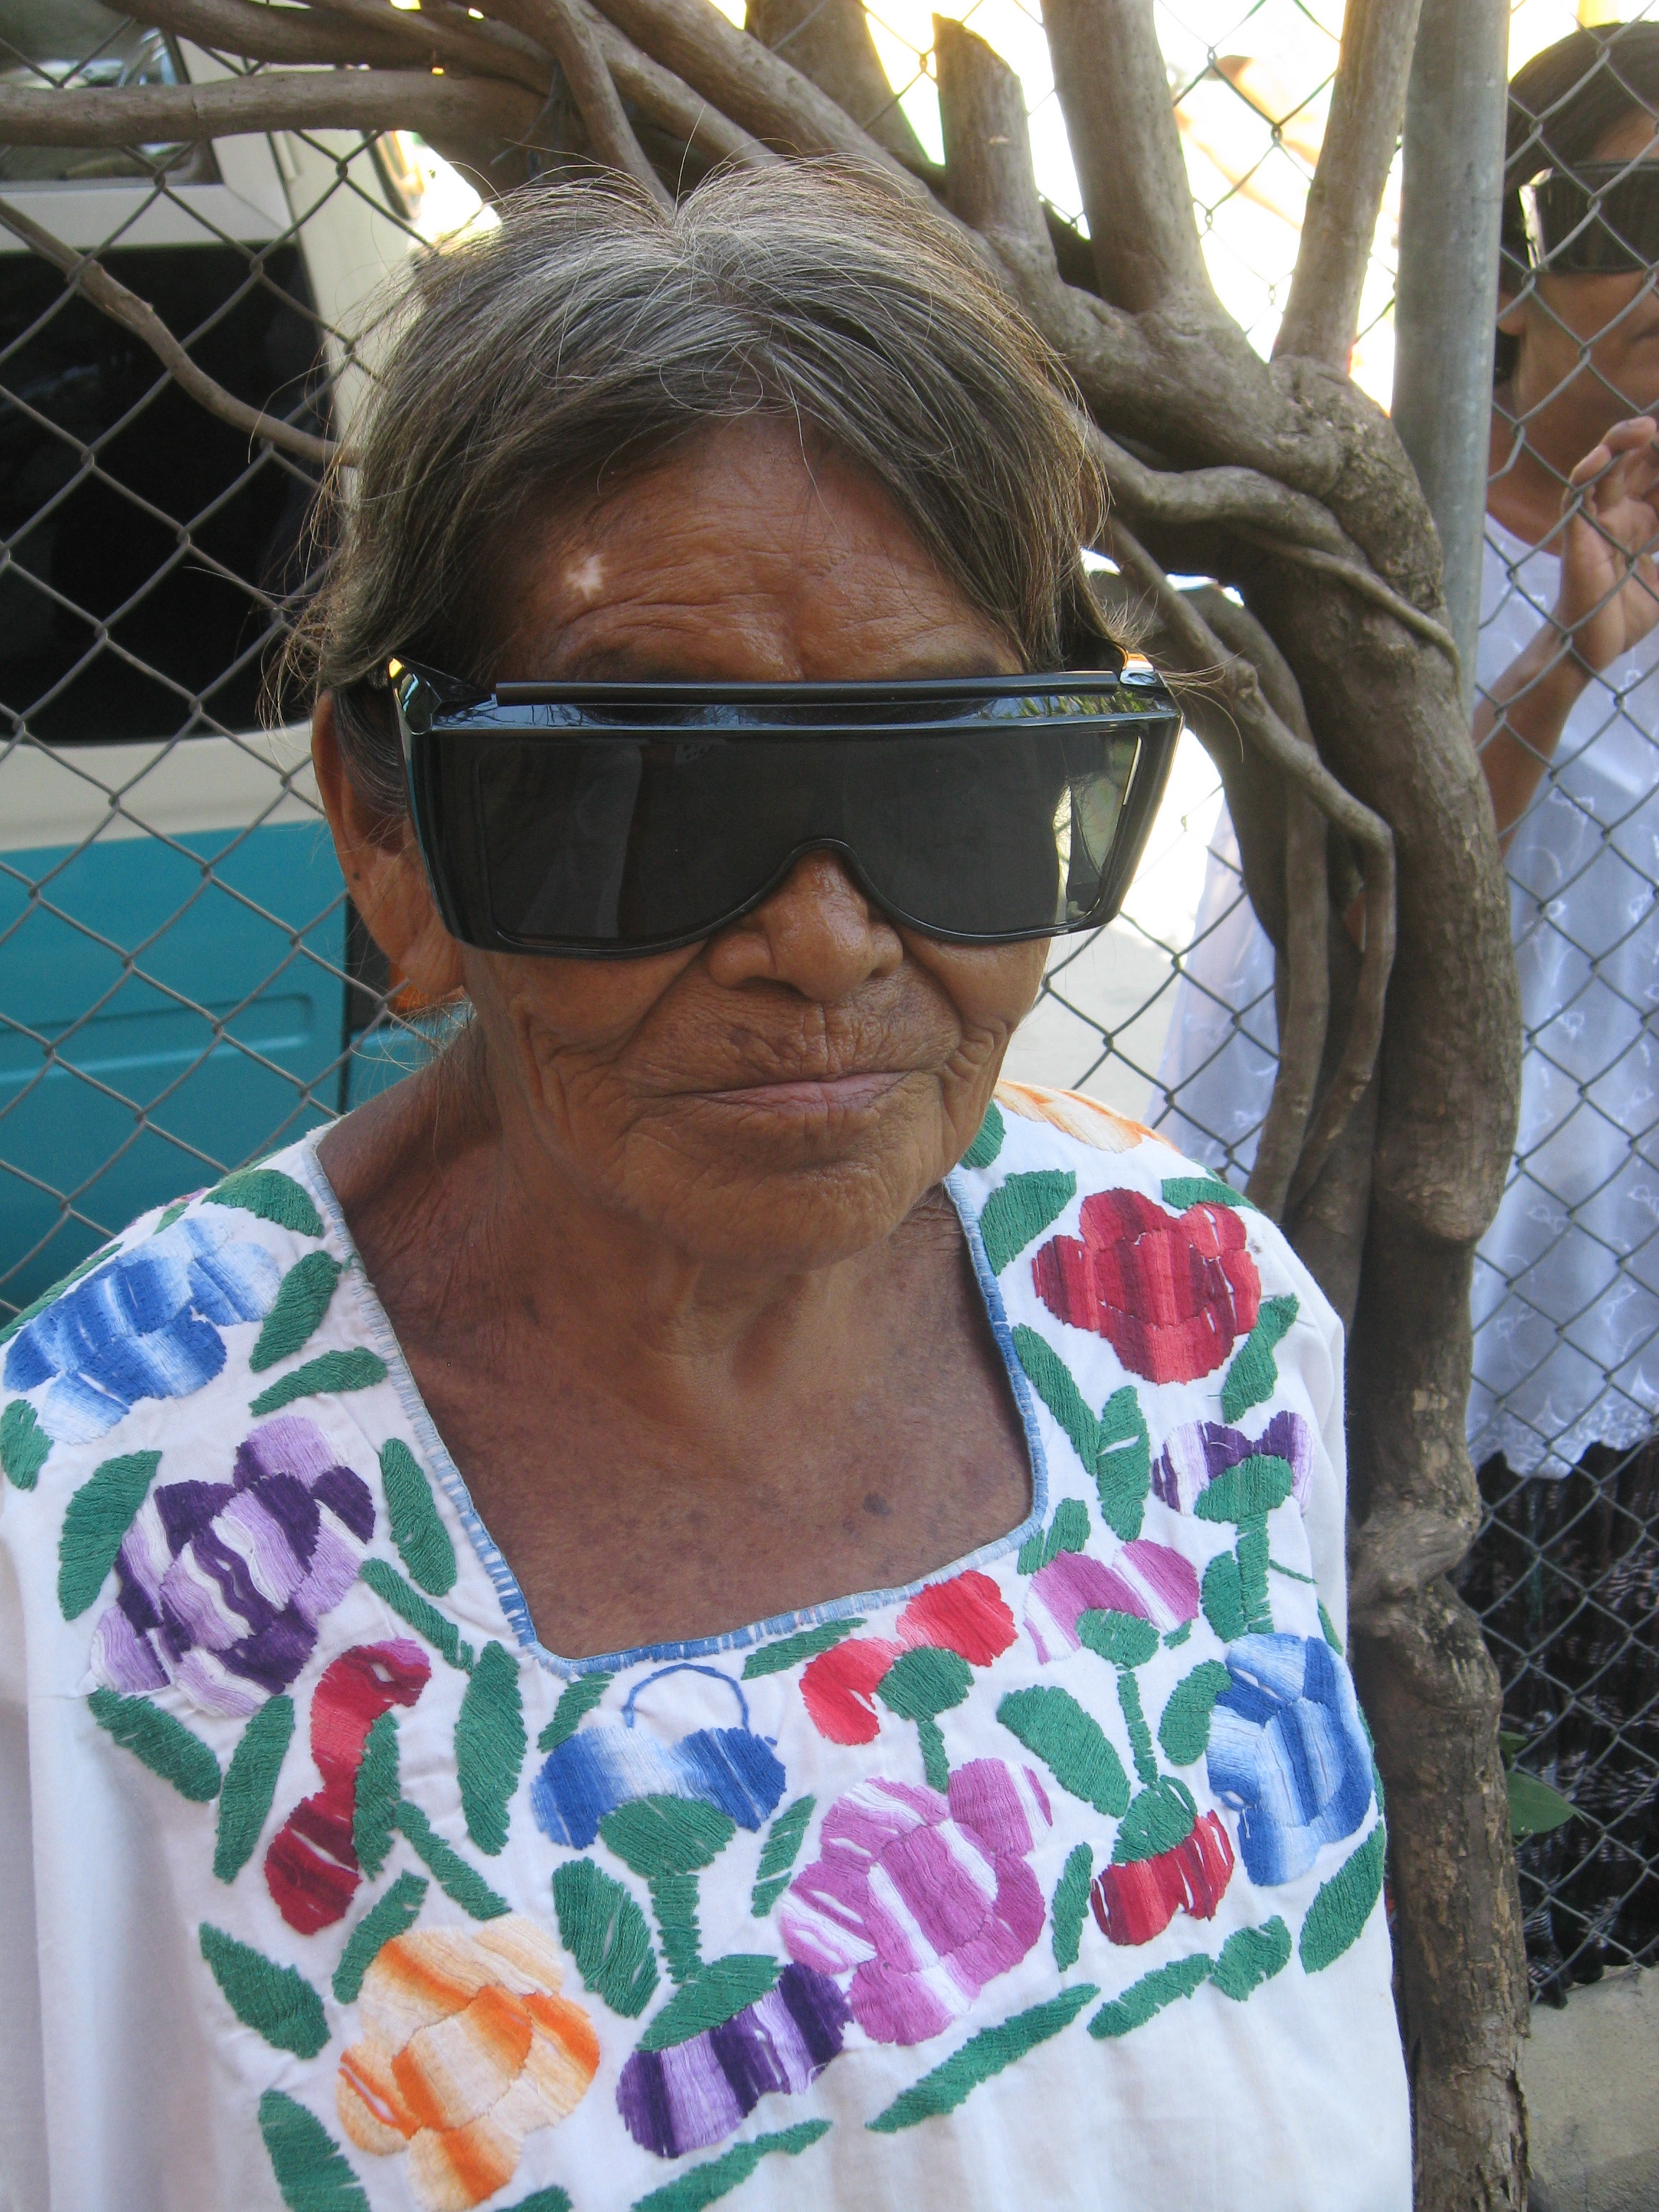 One of 500 Guatemala patients who received eye care at the 3-day eye camp. Photo by Laura Spencer